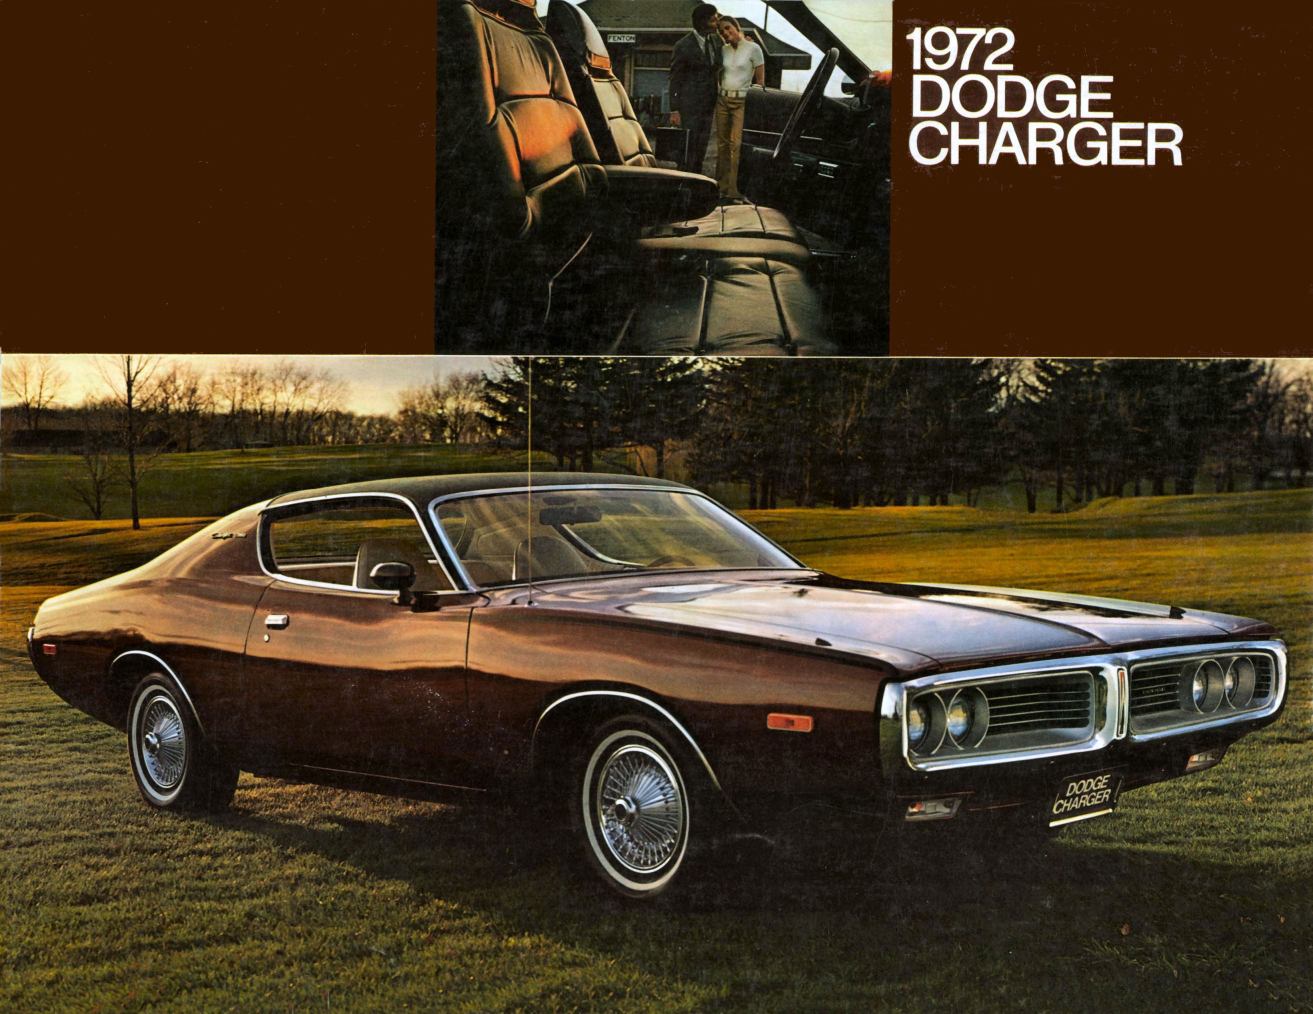 1972 Dodge Charger-01